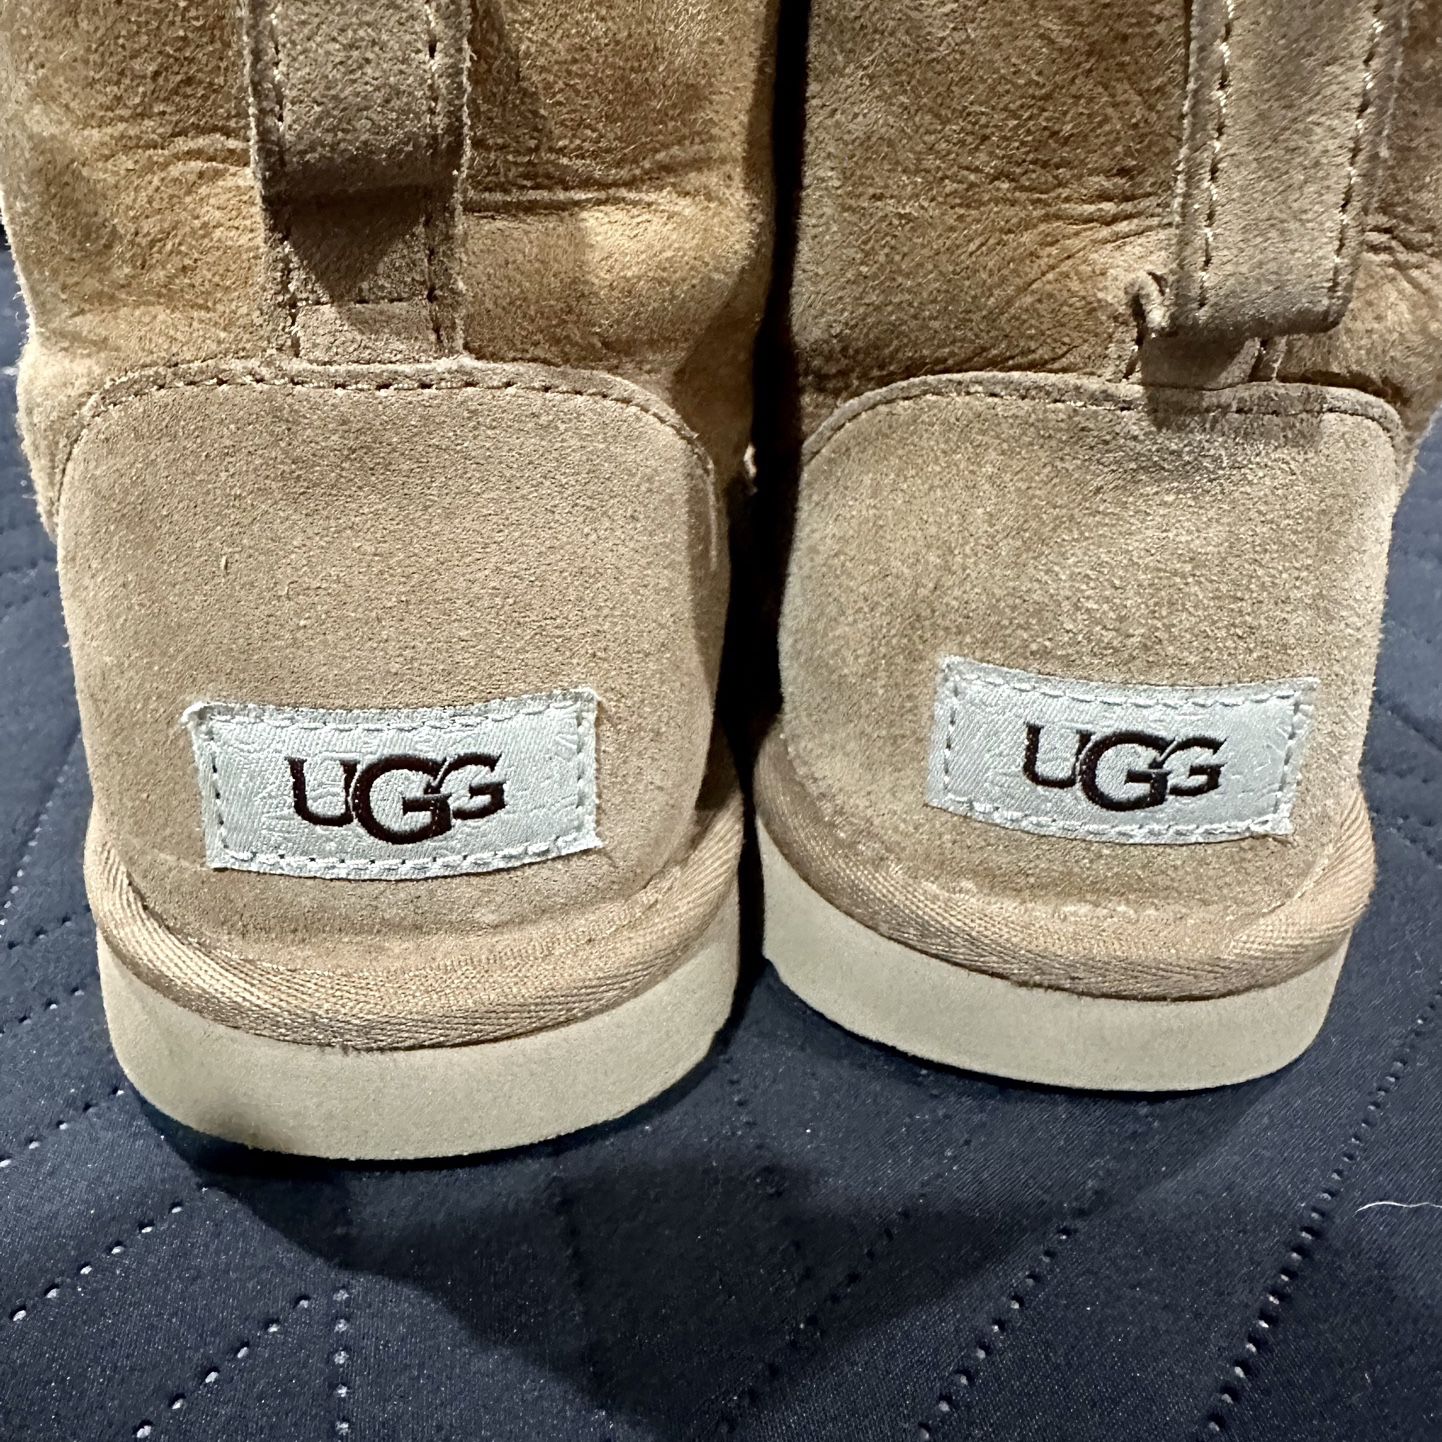 UGG Boots adult size 6 only $40 